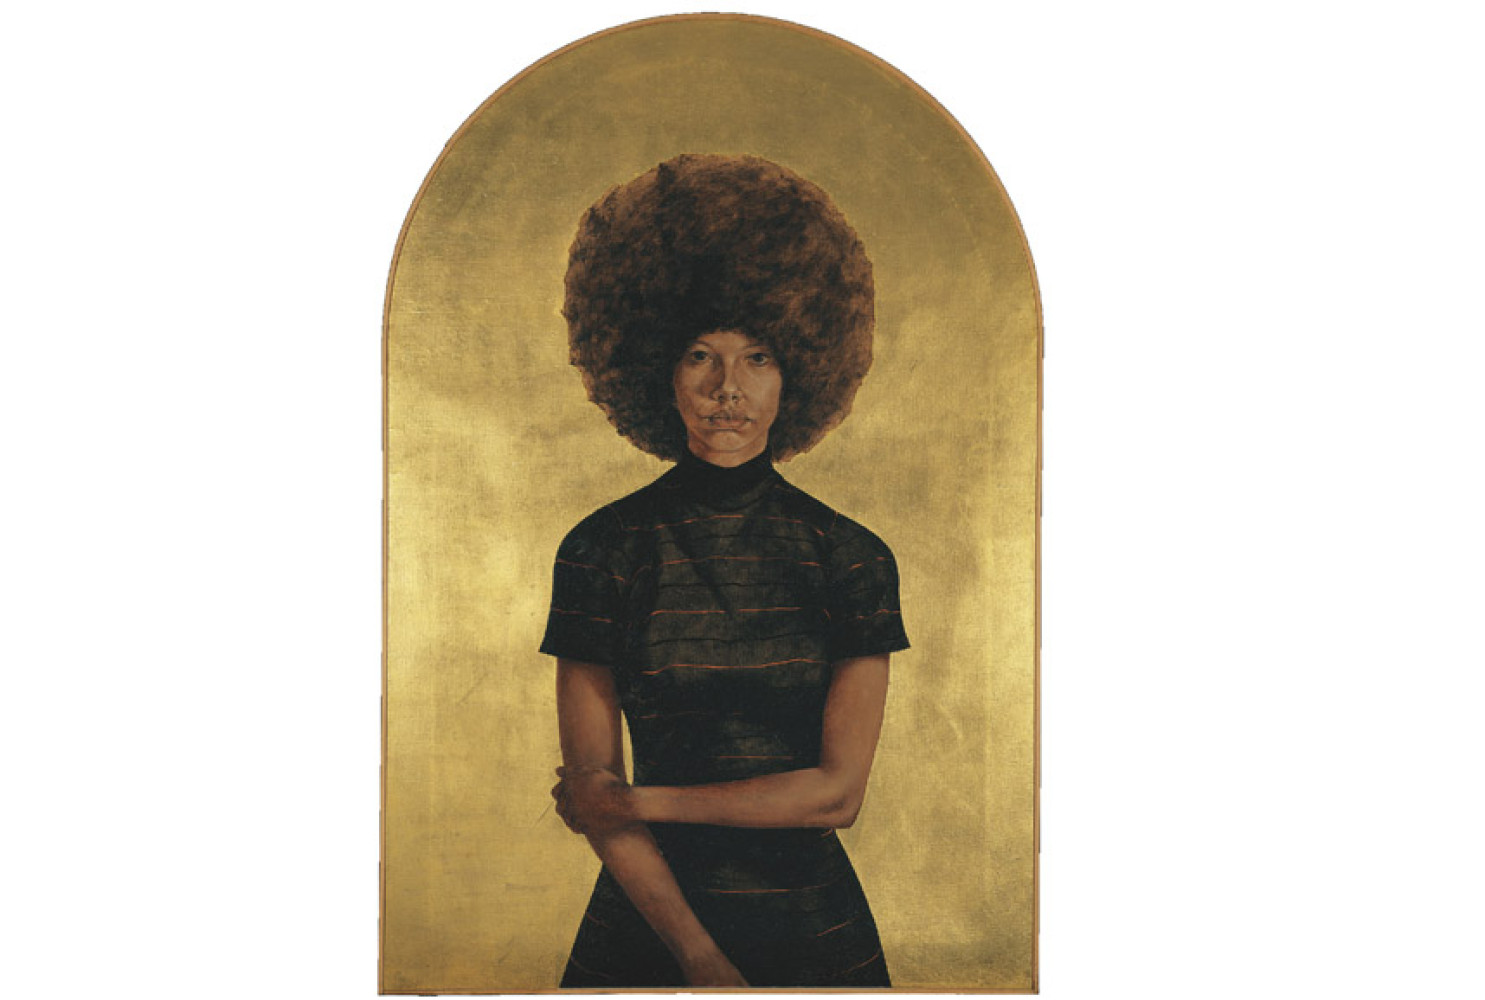 Lawdy Mama, 1969, By Barkley L. Hendricks (American, 1945—2017); Oil and gold leaf on canvas; 53 3/4 x 36 1/4 inches; The Studio Museum in Harlem; ©Estate of Barkley L. Hendricks; Image courtesy of the artist's estate and Jack Shainman Gallery, New York